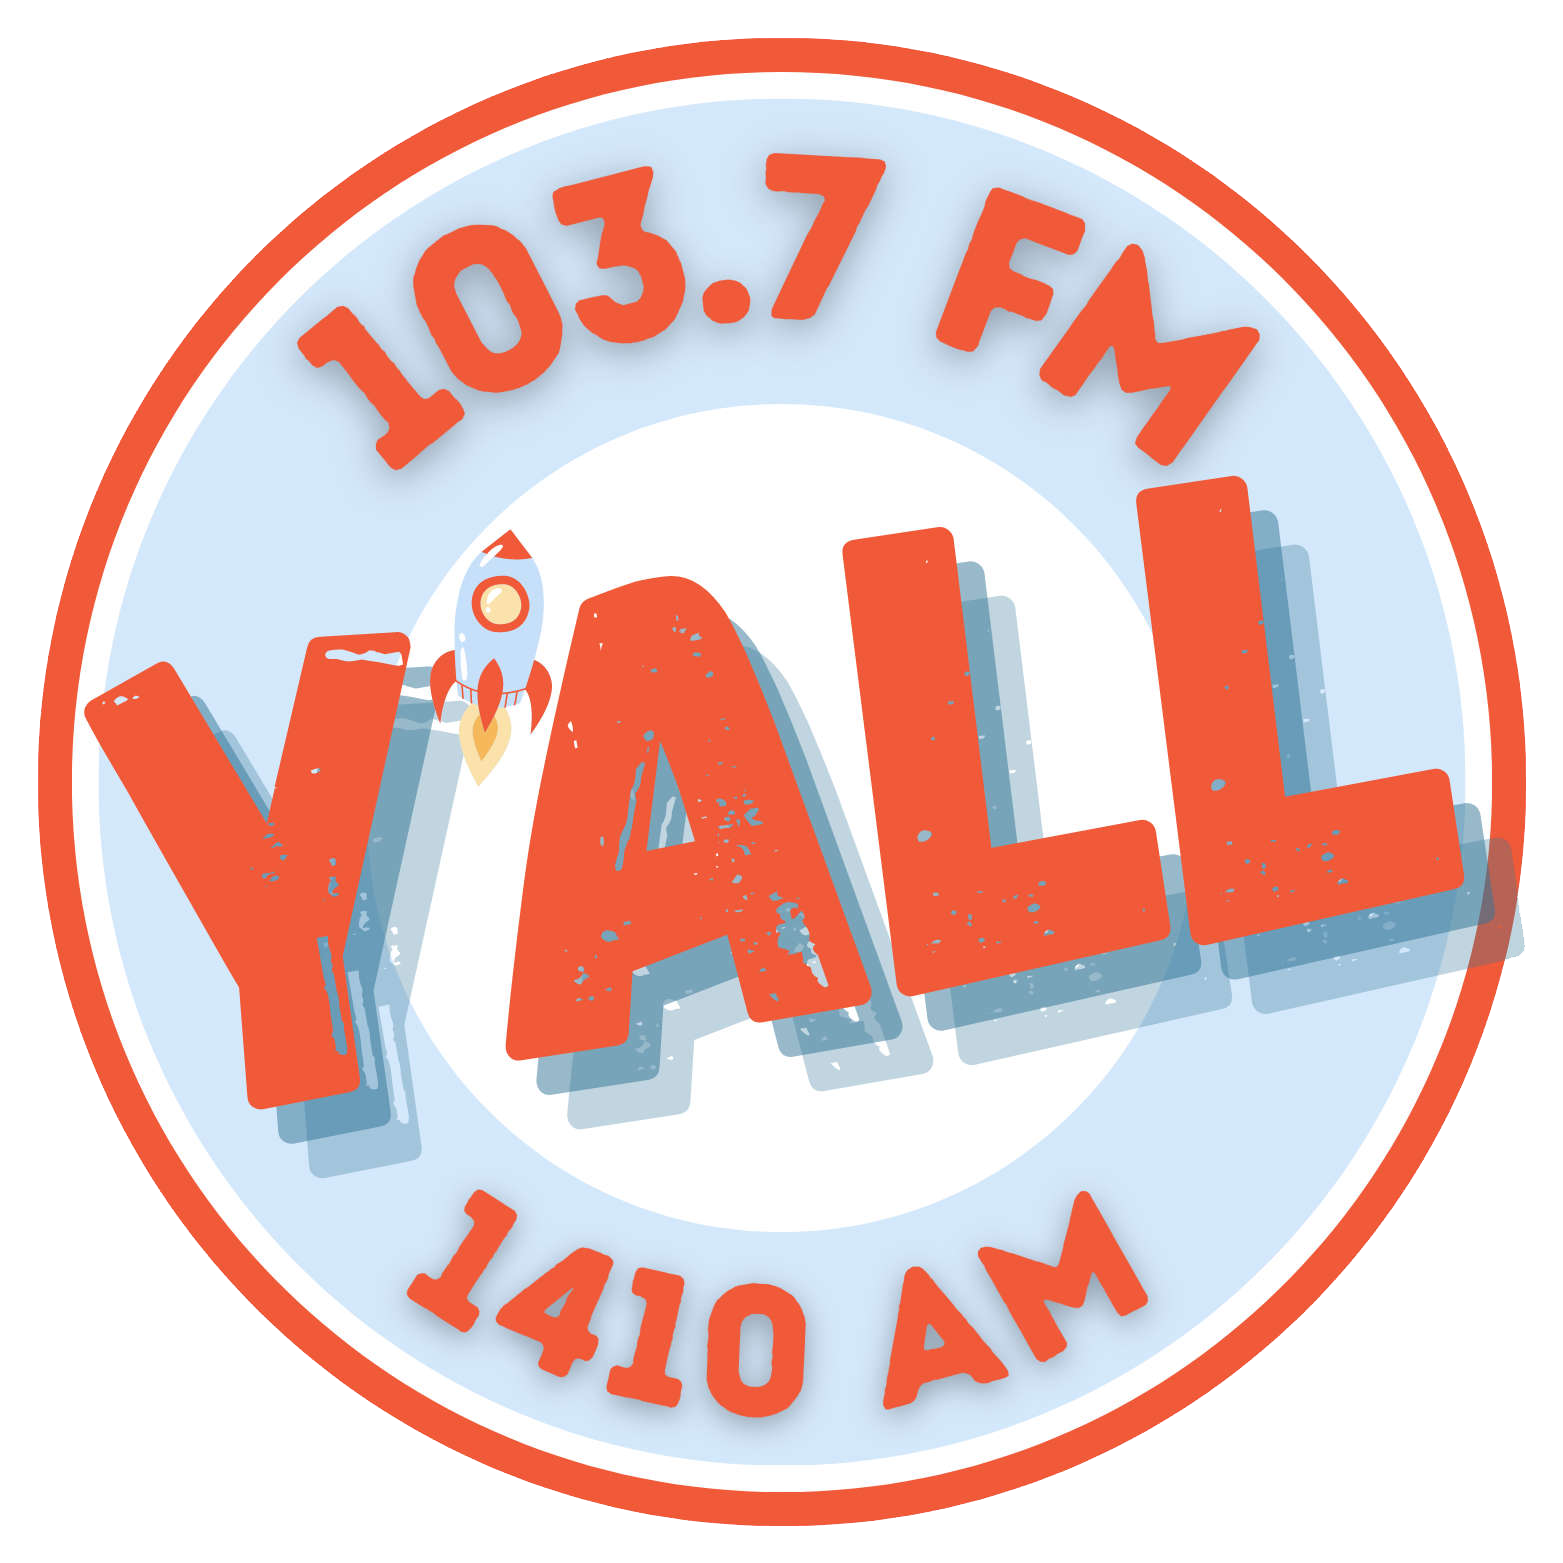 Y’all 103.7 - KTNK 1410 - Lompoc Valley's Country 